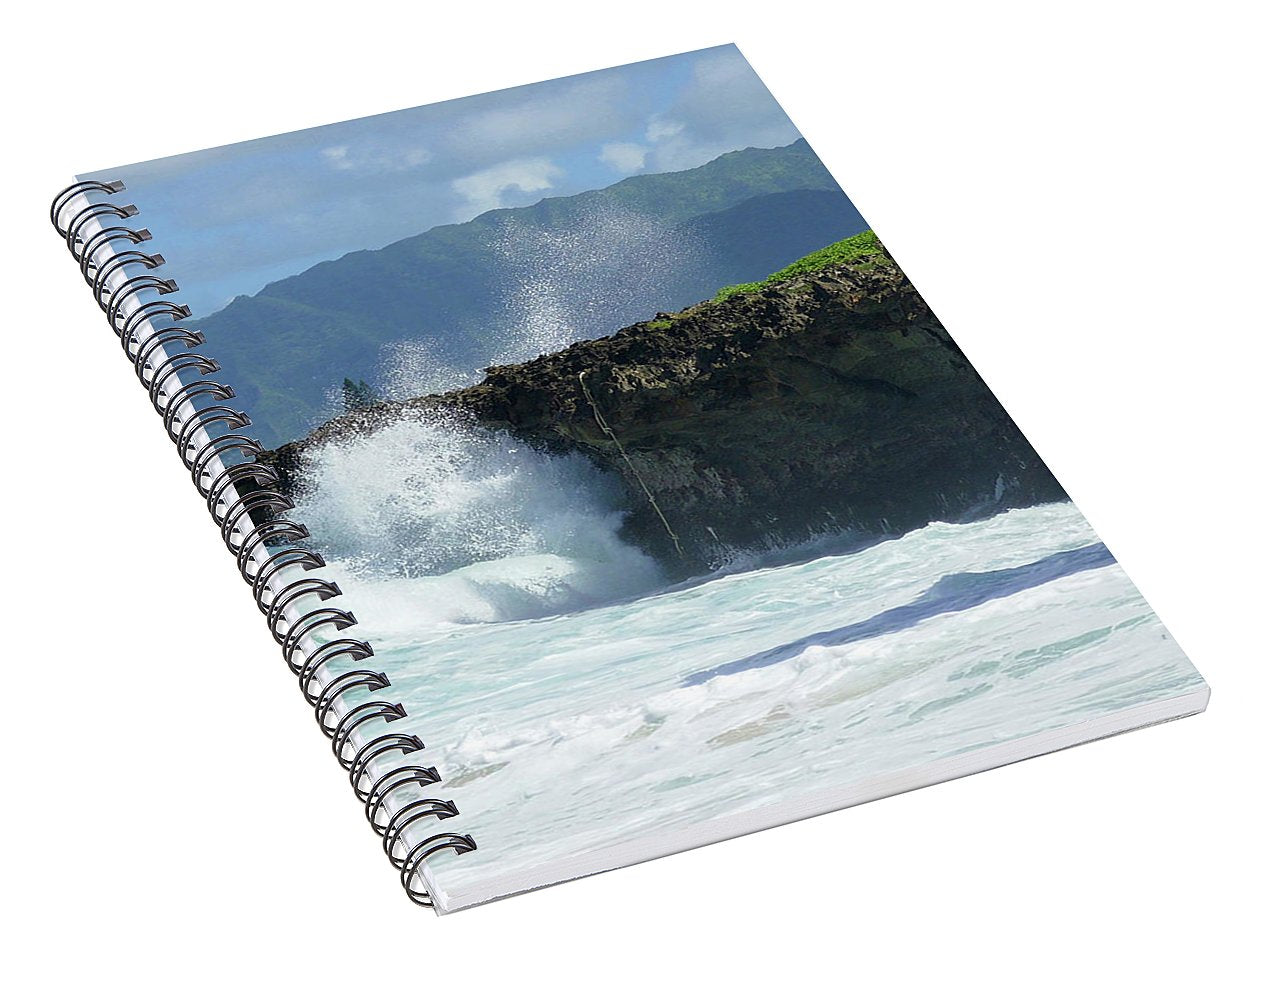 Rockin Surfer's Rope - Spiral Notebook - Fry1Productions